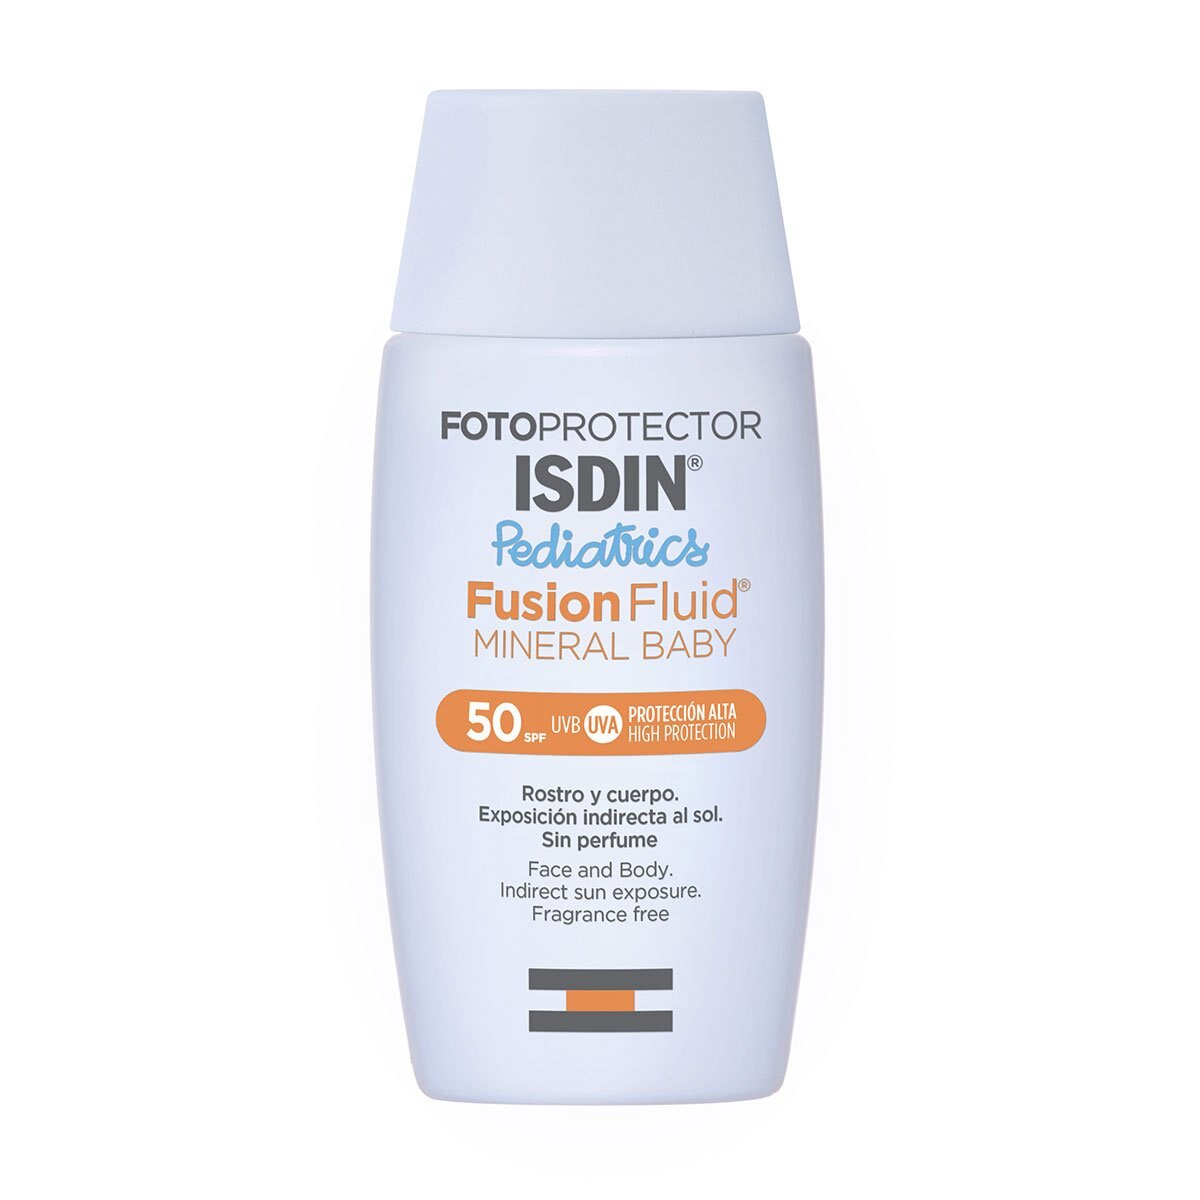 Fotoprotector Isdin 50 Mineral Baby Ped50Ml